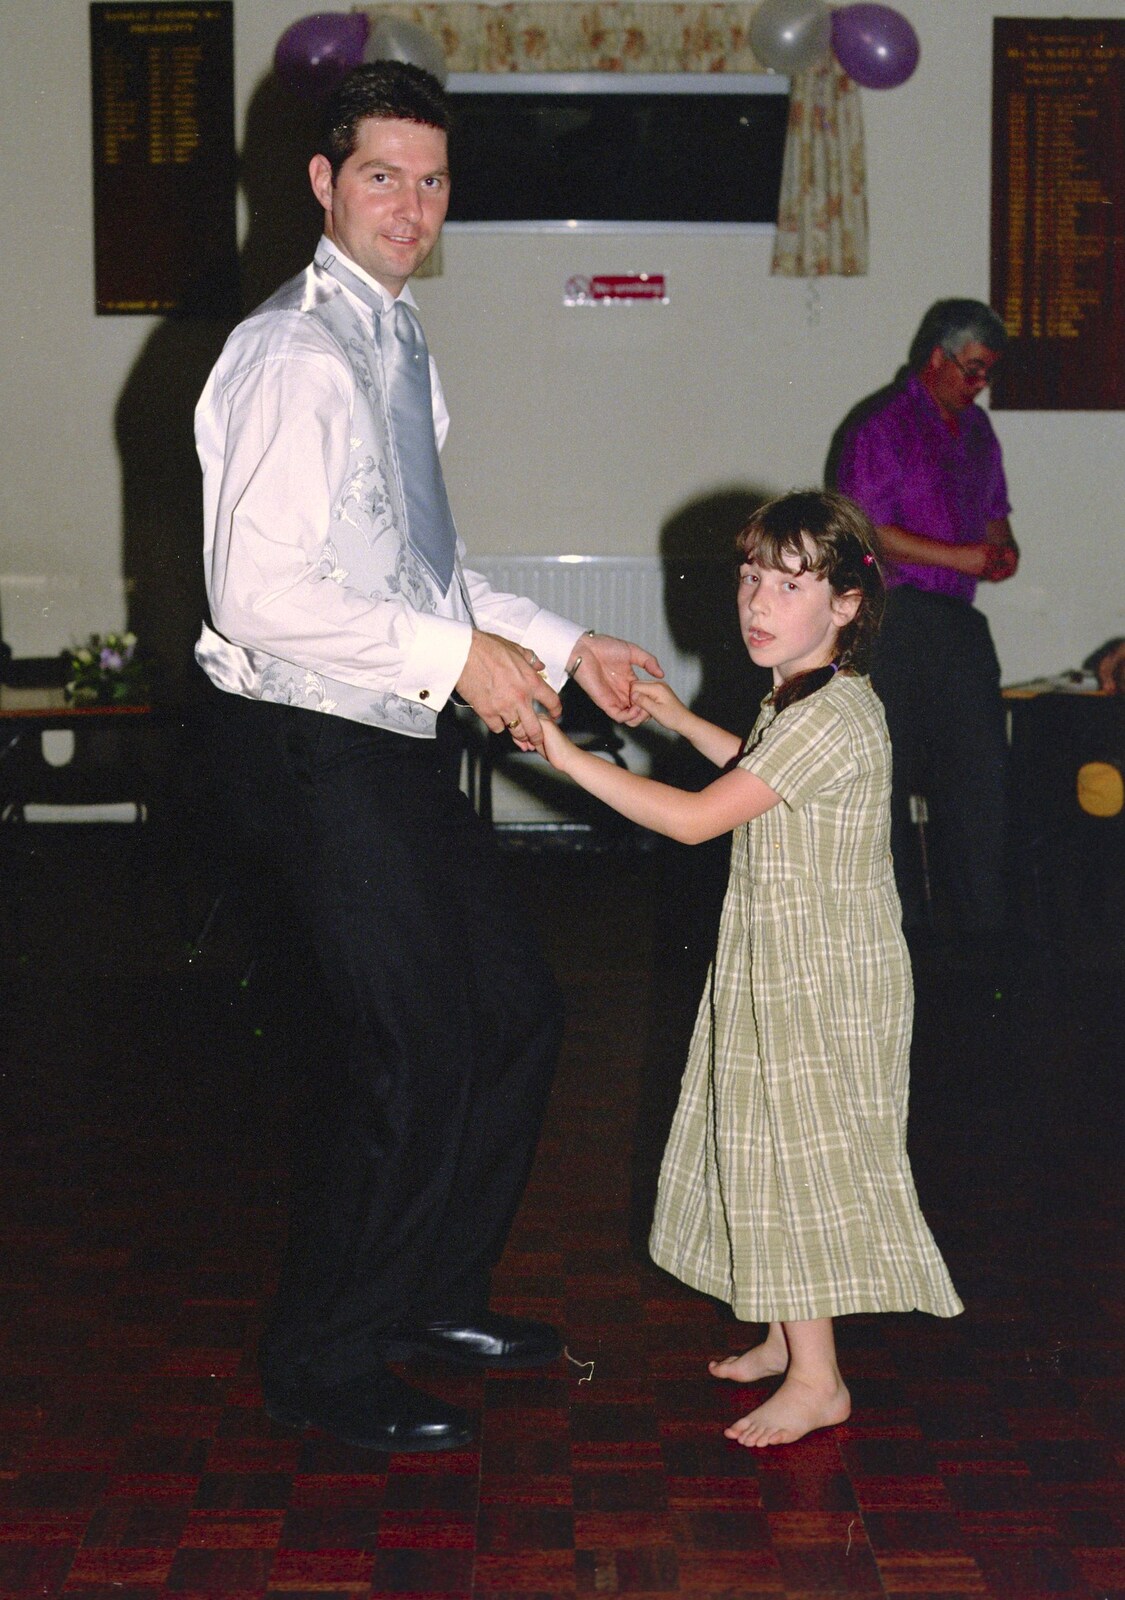 Sean dances with a small girl from Sean and Michelle's Wedding, Bashley FC, New Milton - 12th August 2000